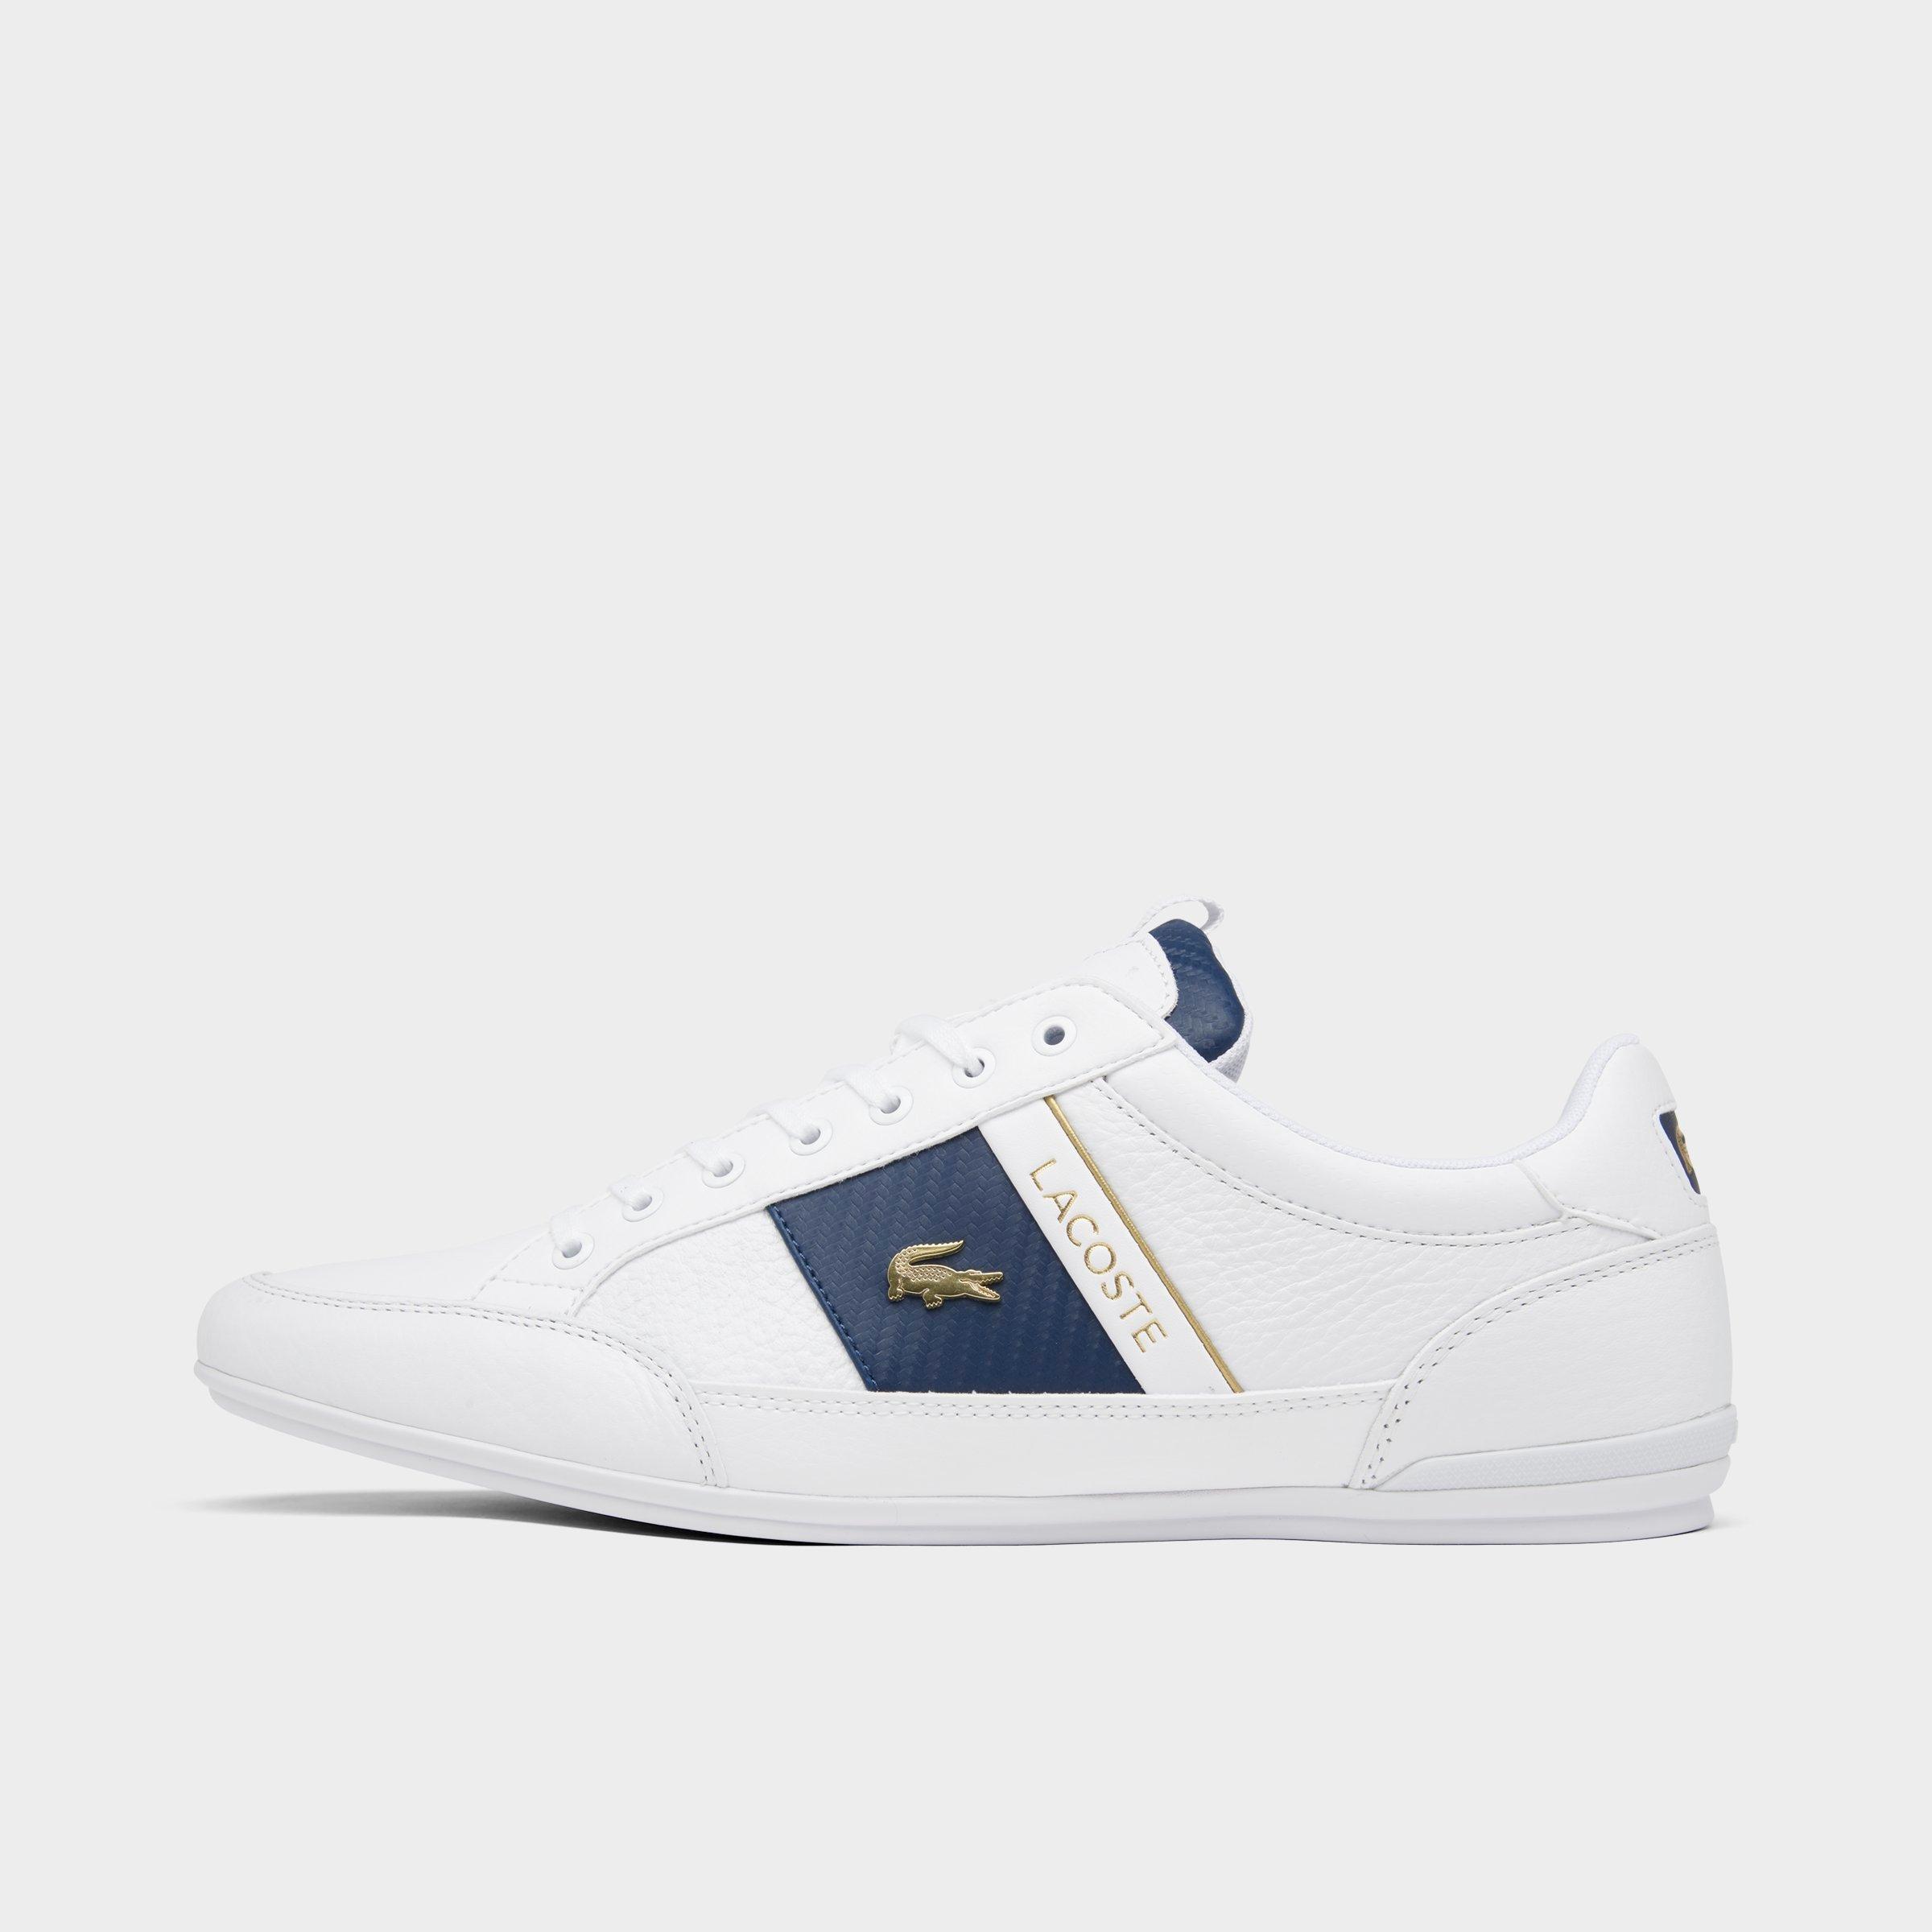 jd sports lacoste trainers